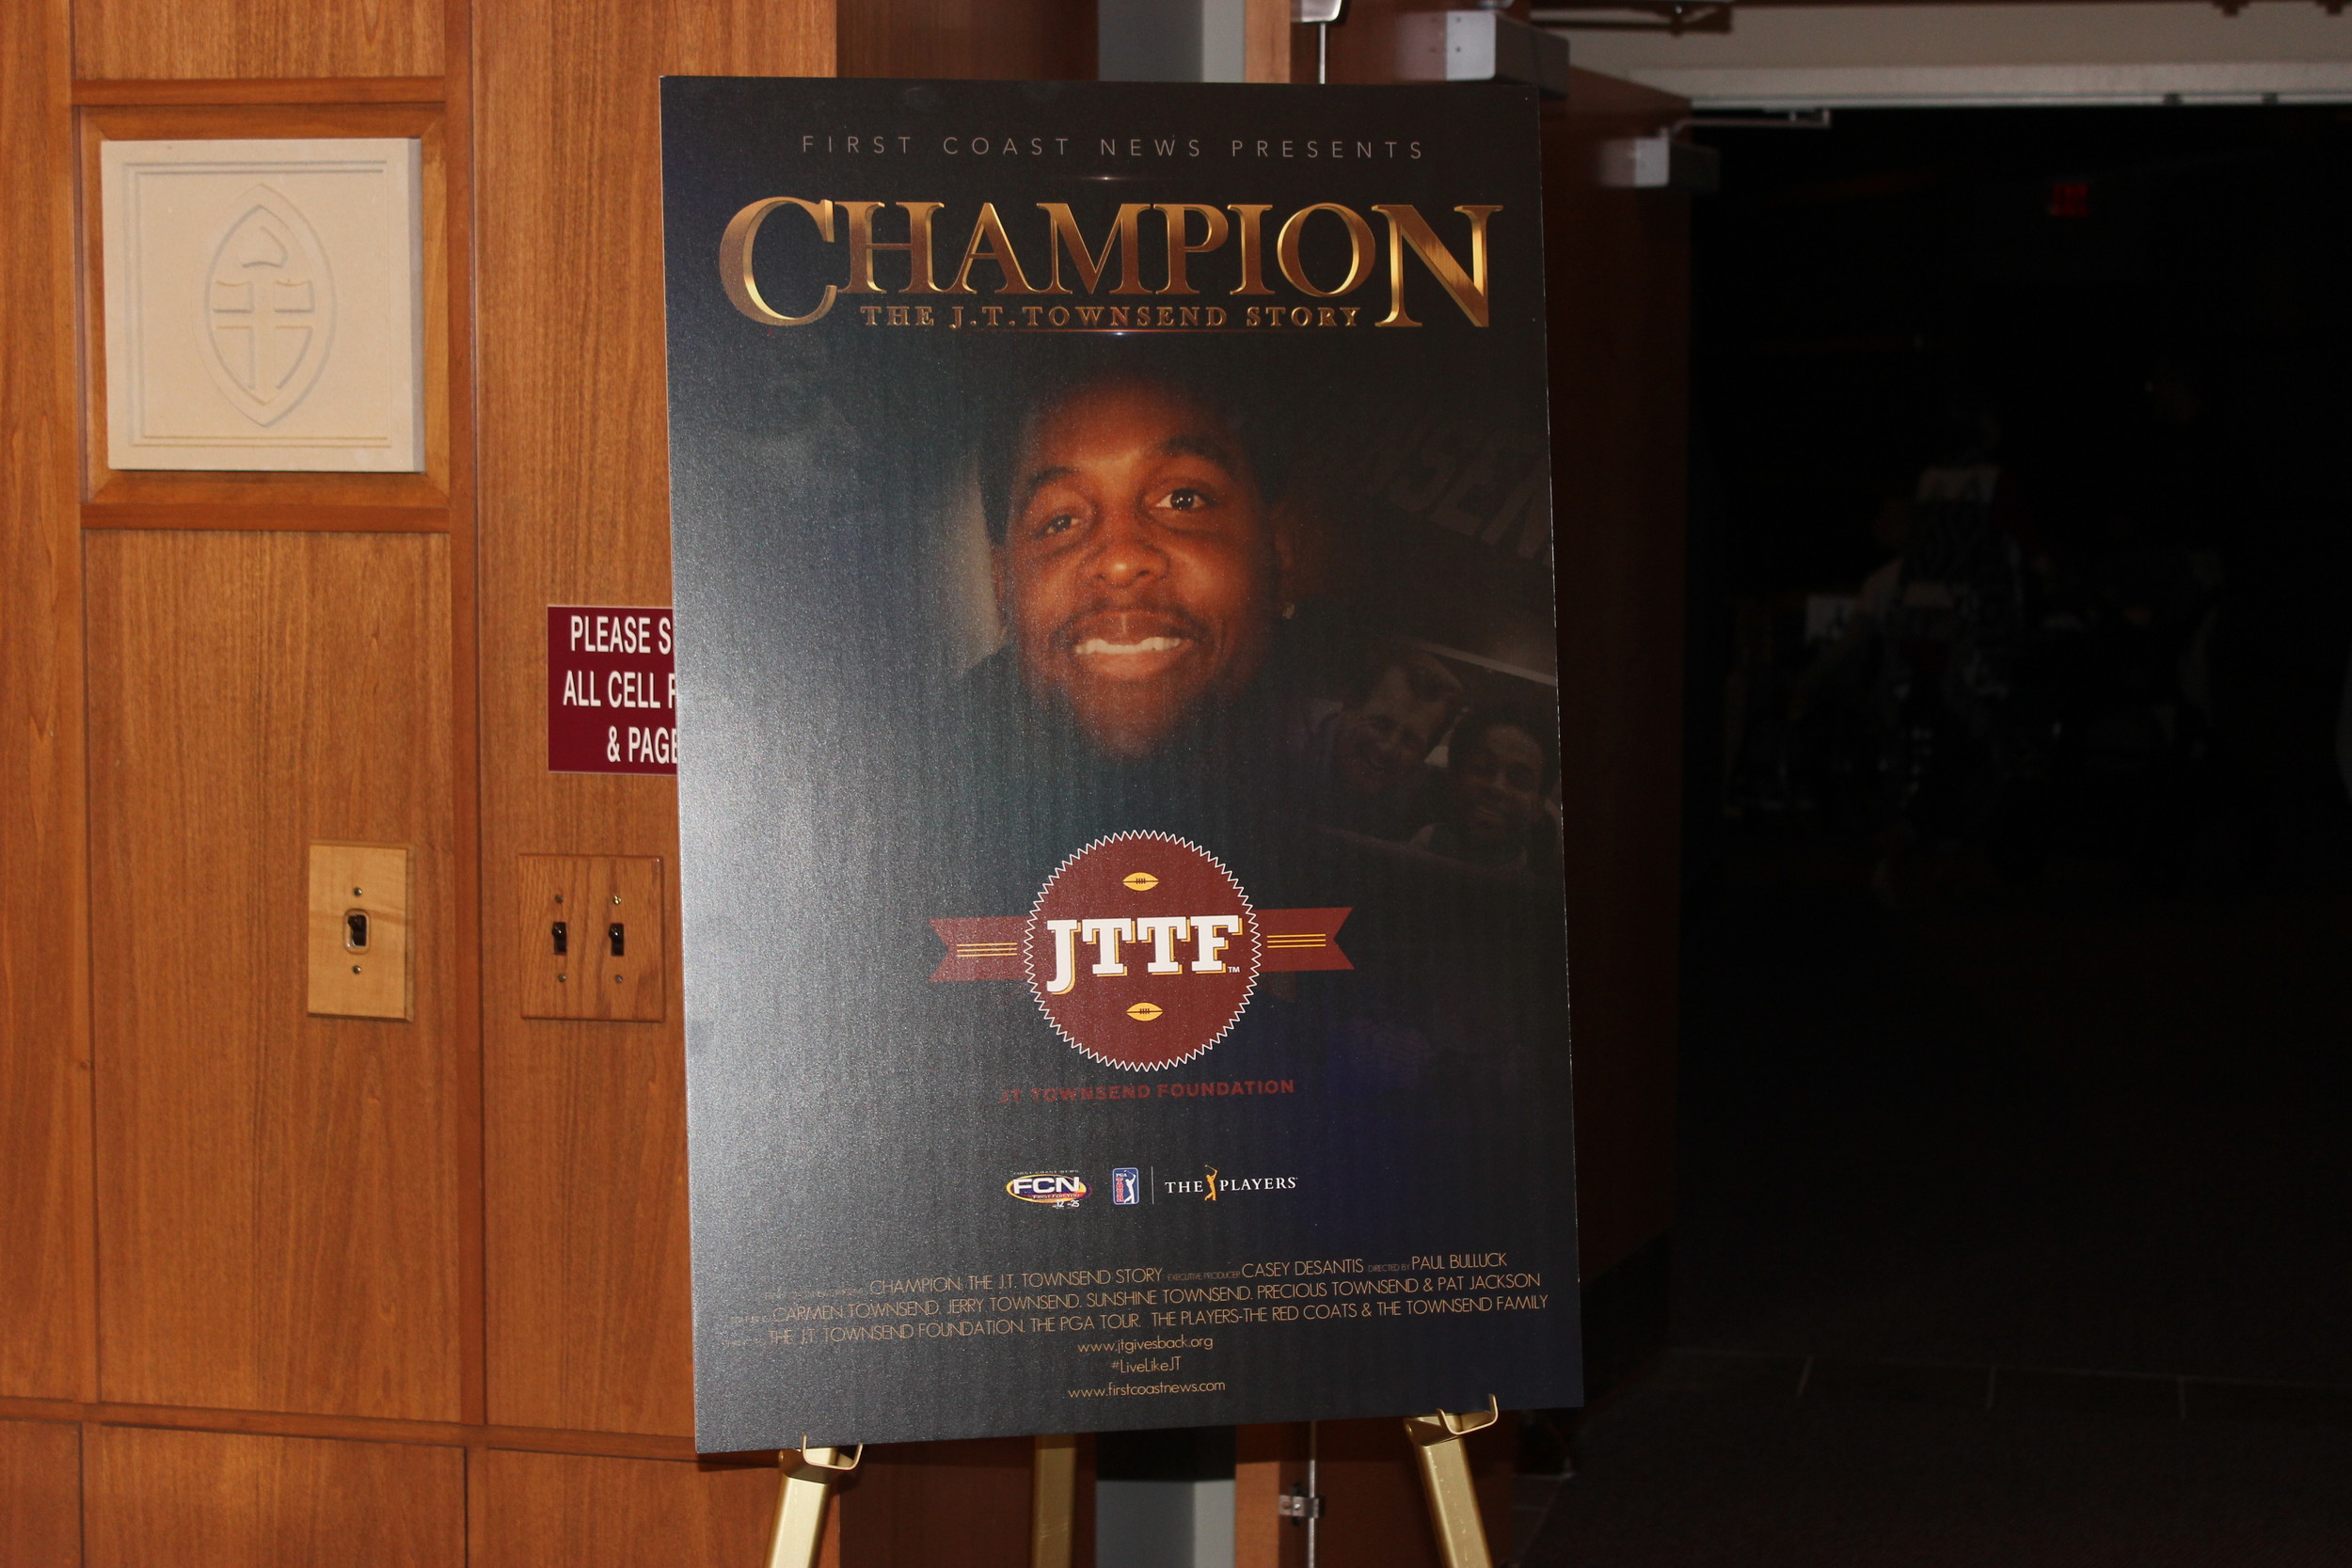 "Champion: The J.T. Townsend Story" is a one-hour documentary about the life of a former Episcopal High School student who received a near-fatal spinal injury on the football field, including his lasting impacts on the First Coast community.